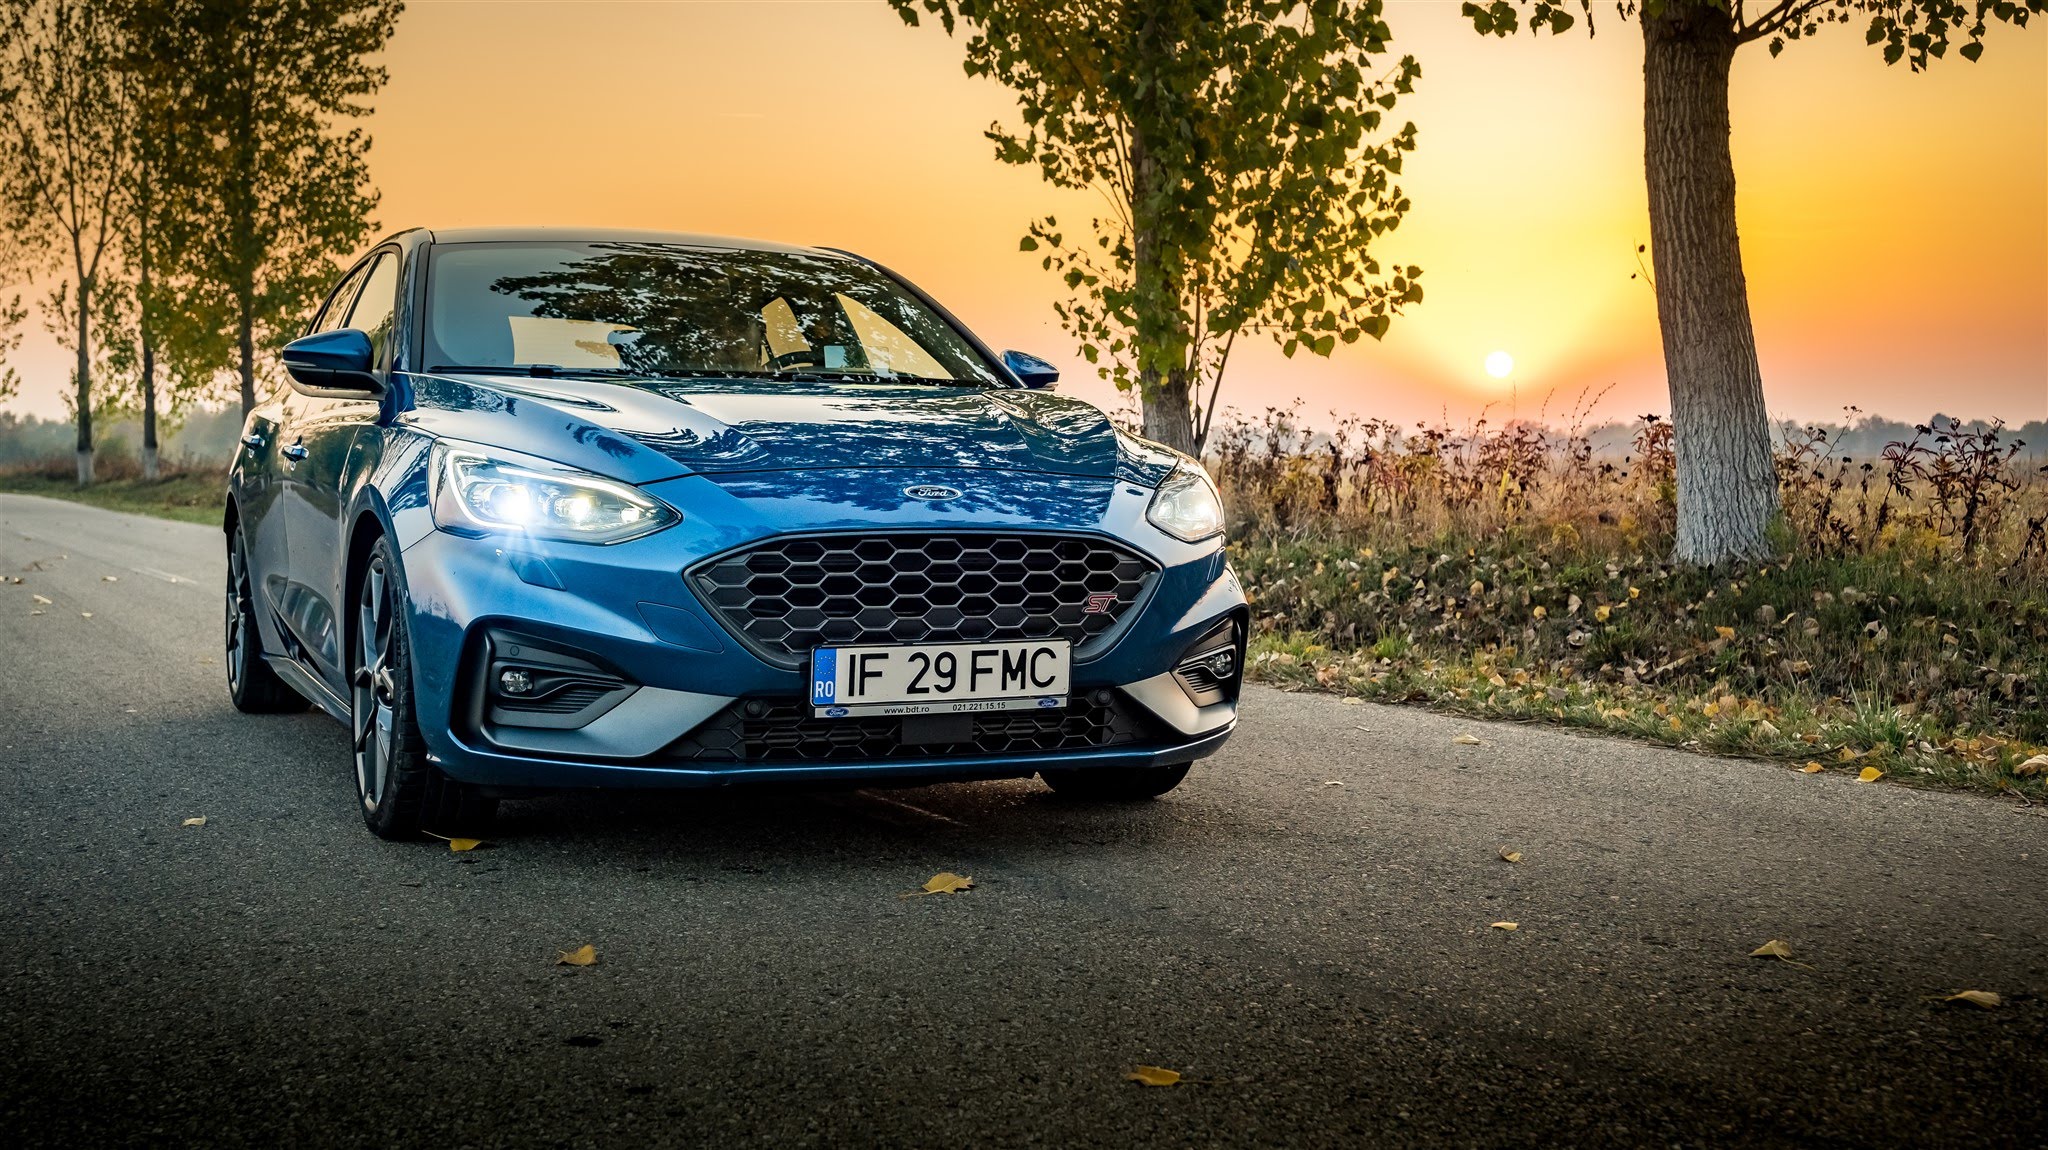 https://www.gadget.ro/wp-content/uploads/2019/12/Ford-Focus-ST-2019-2.3-EcoBoost-280-CP-M6-4.jpg